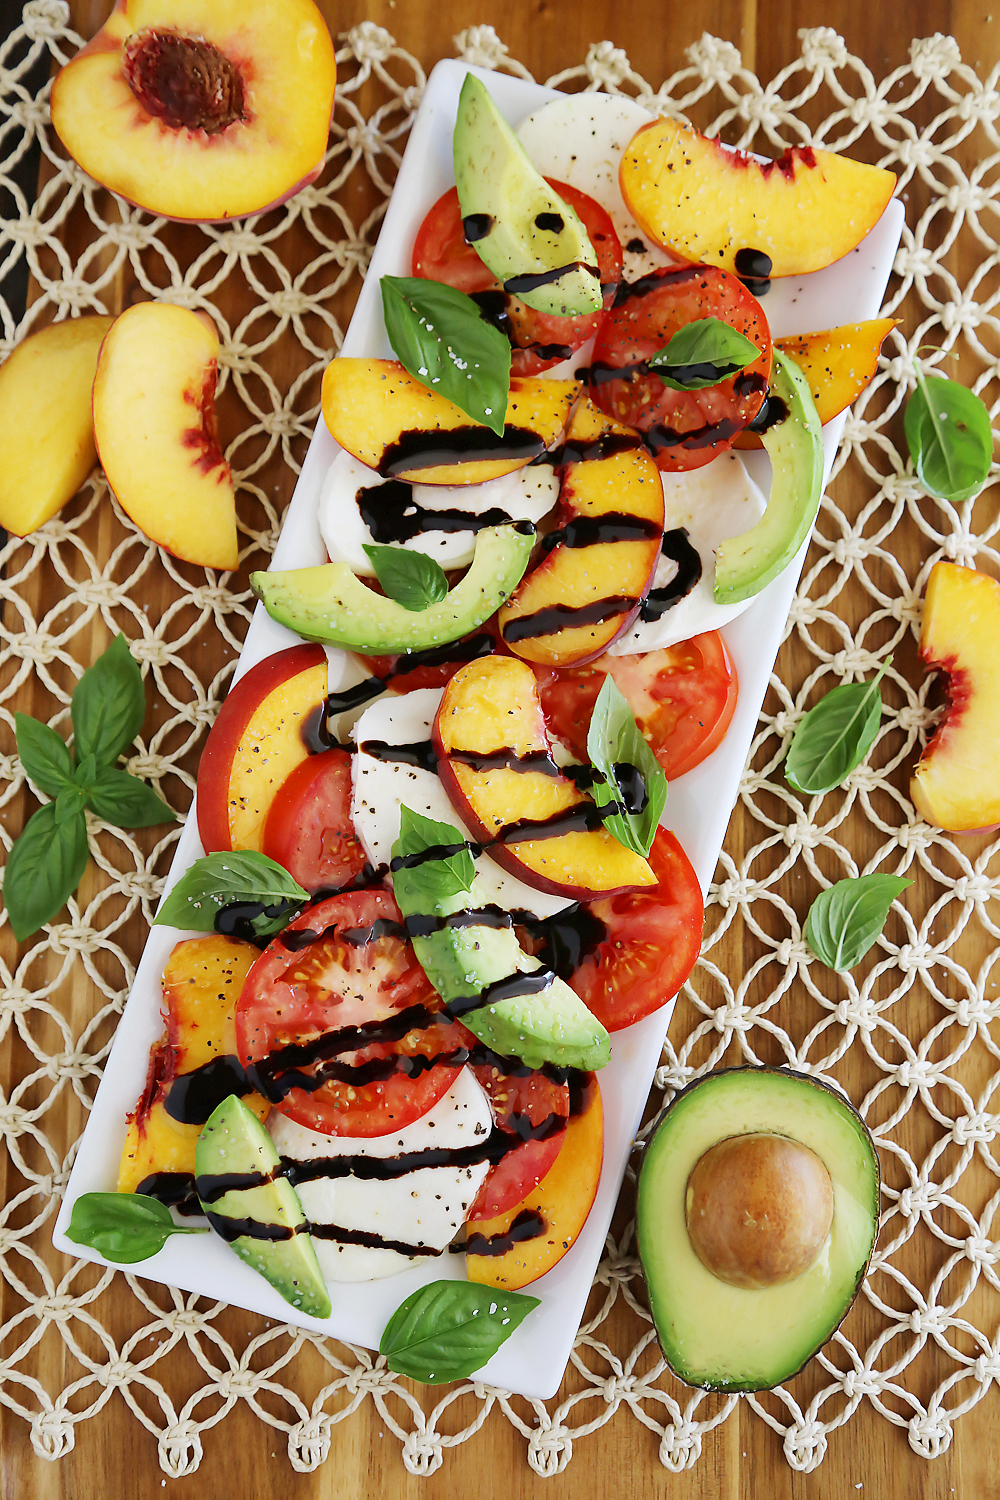 Peach and Avocado Caprese Salad - Salty, sweet, tangy and fresh! So easy and delicious with crusty bread + salad. Thecomfortofcooking.com